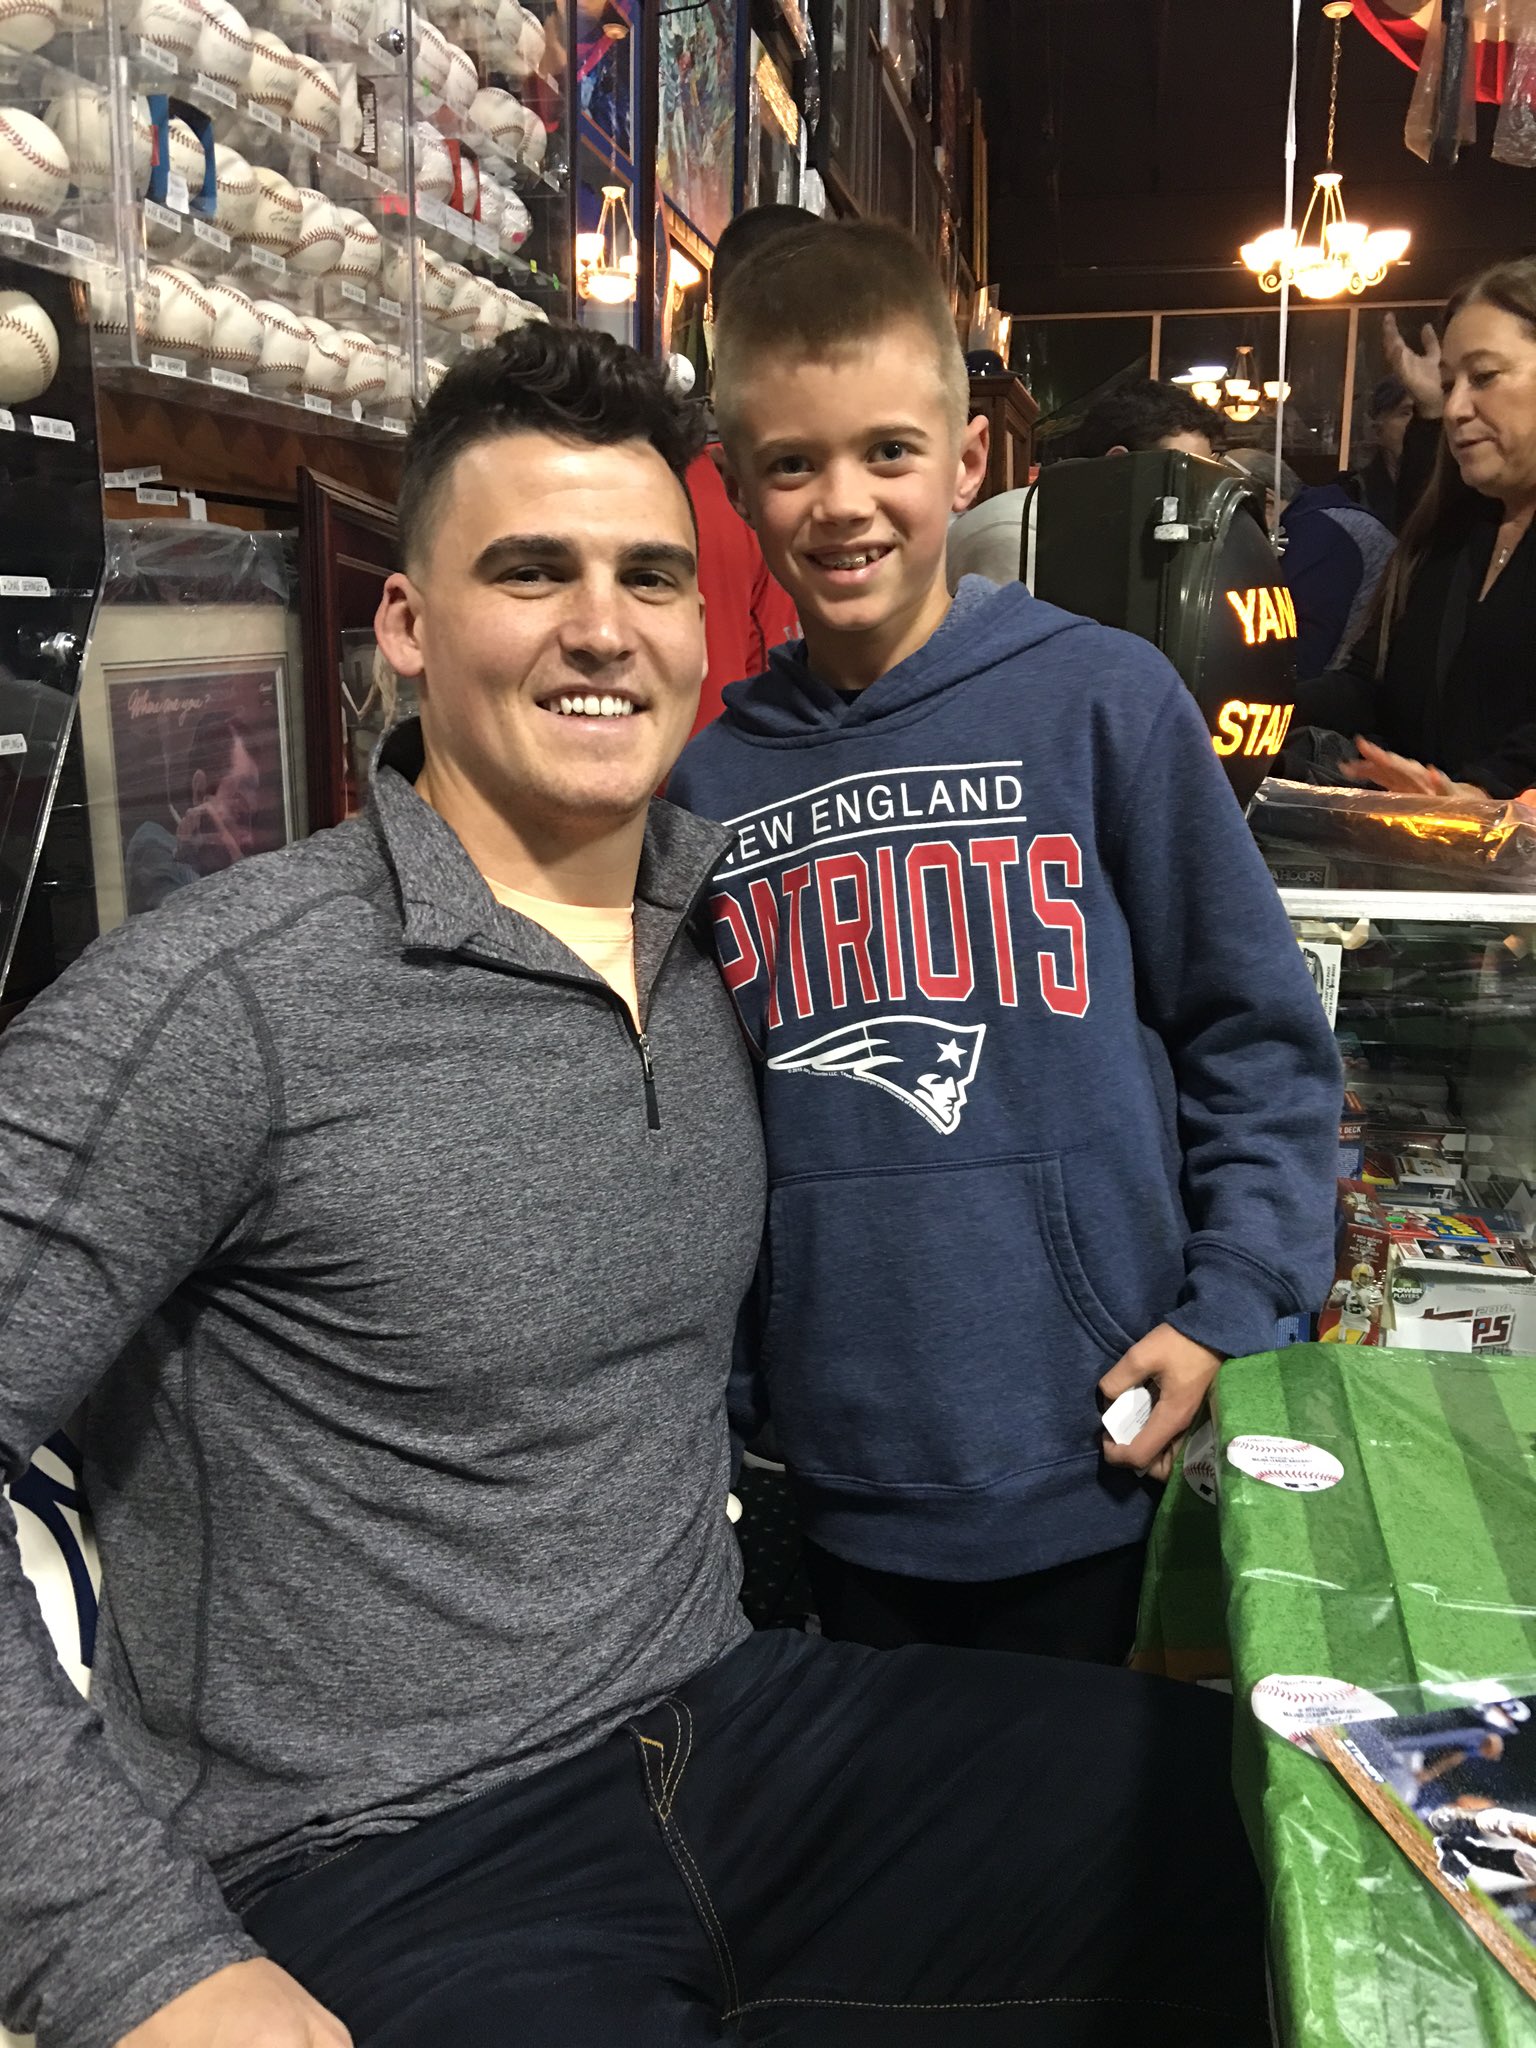 Tyler Austin on Twitter: "Had a blast meeting the real Tyler Austin and